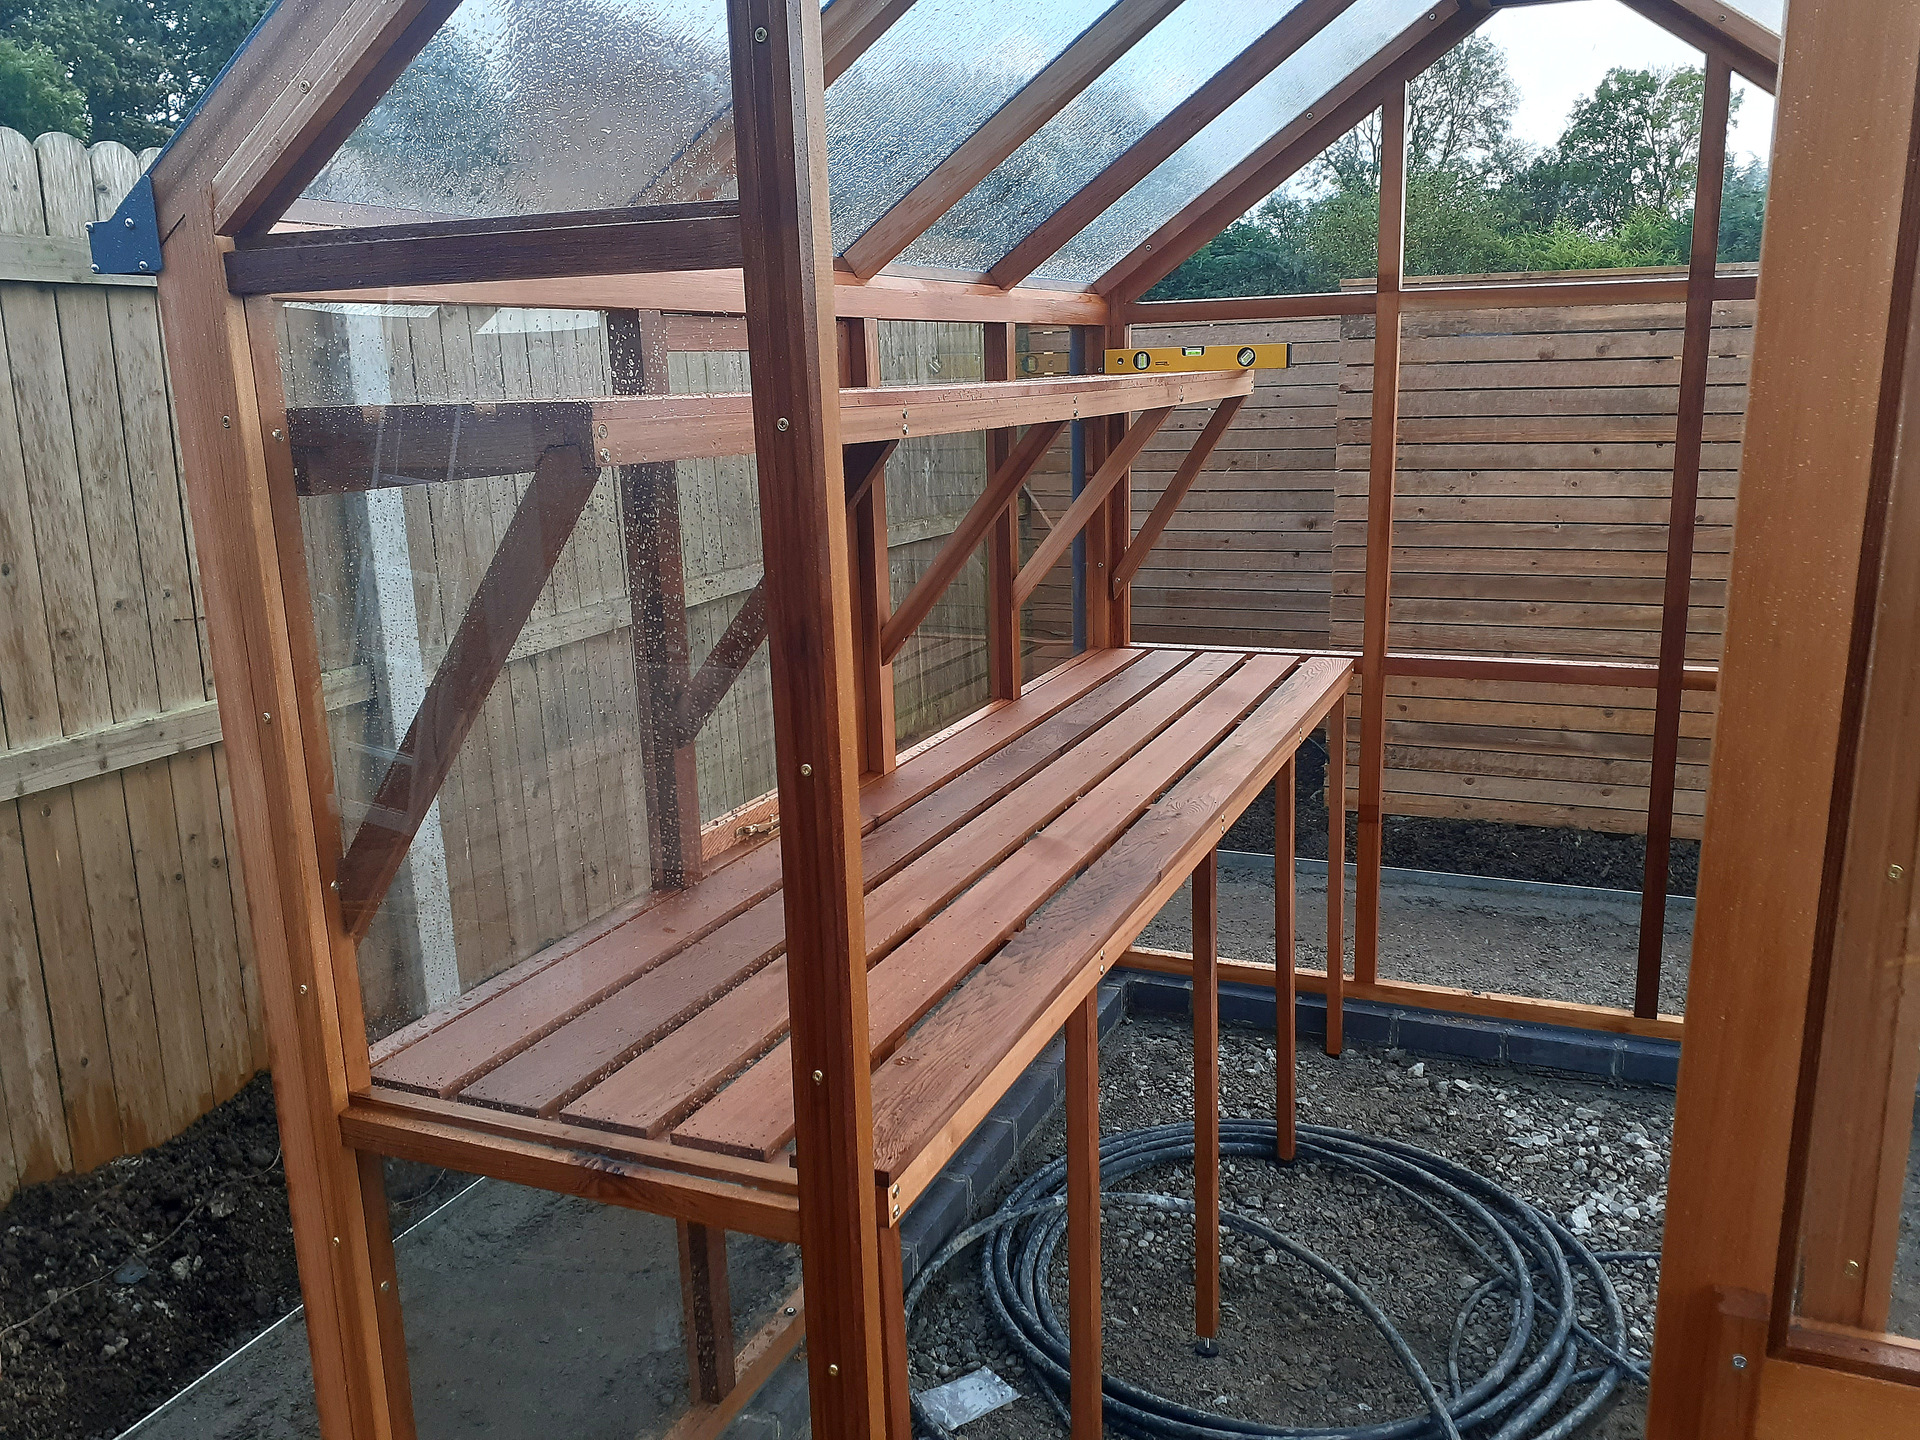 Gabriel Ash Classic Six Greenhouse (6ft x 8ft) with Staging & Shelving & optional OSMO UV Timber Protection, supplied + fitted in Maynooth, Co Kildare